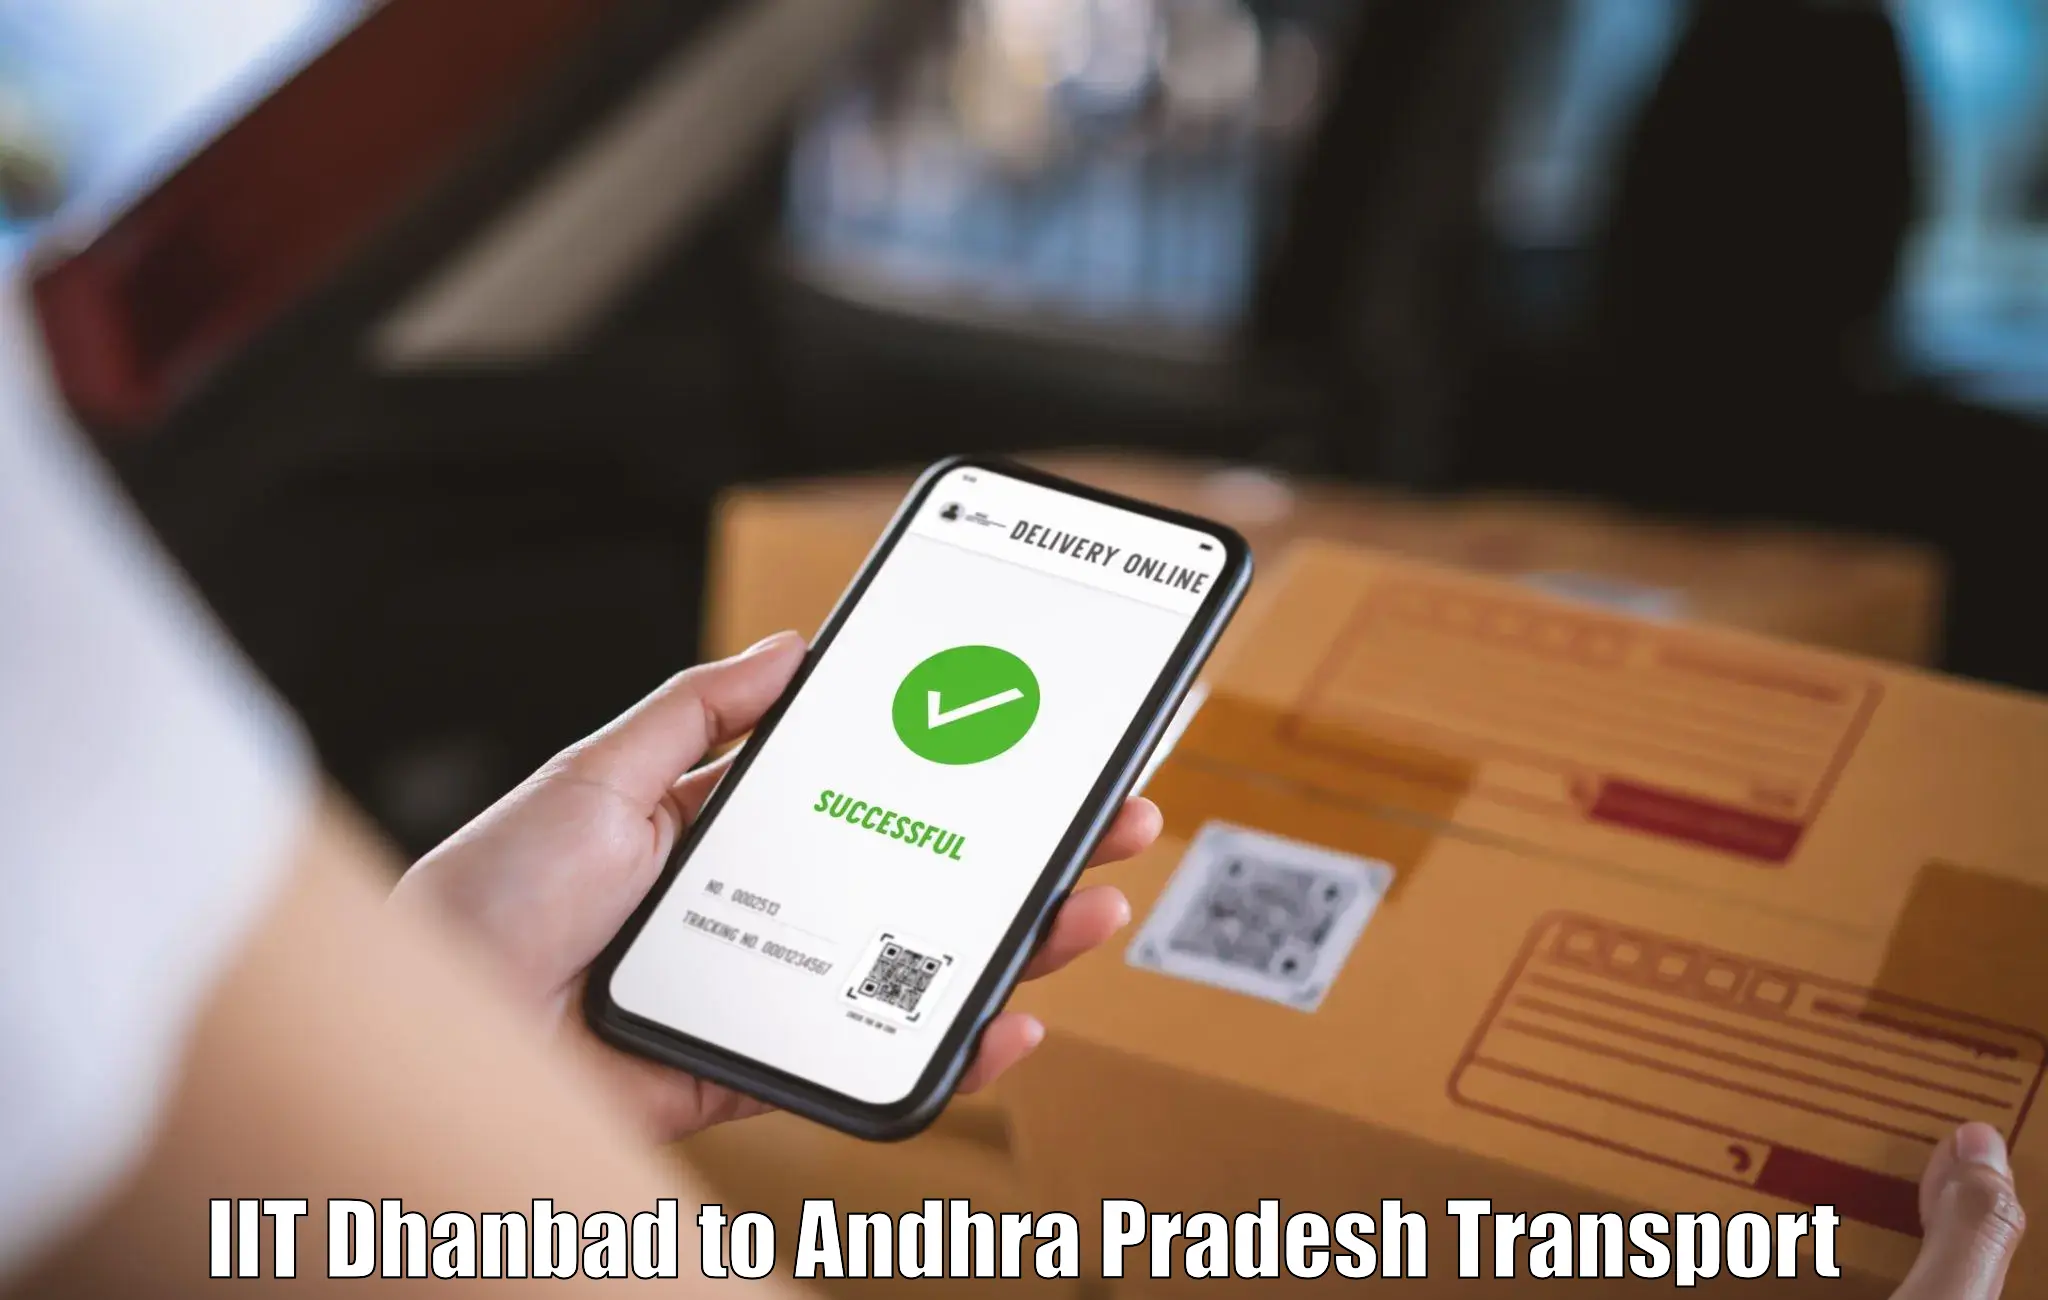 Goods delivery service IIT Dhanbad to Visakhapatnam Port